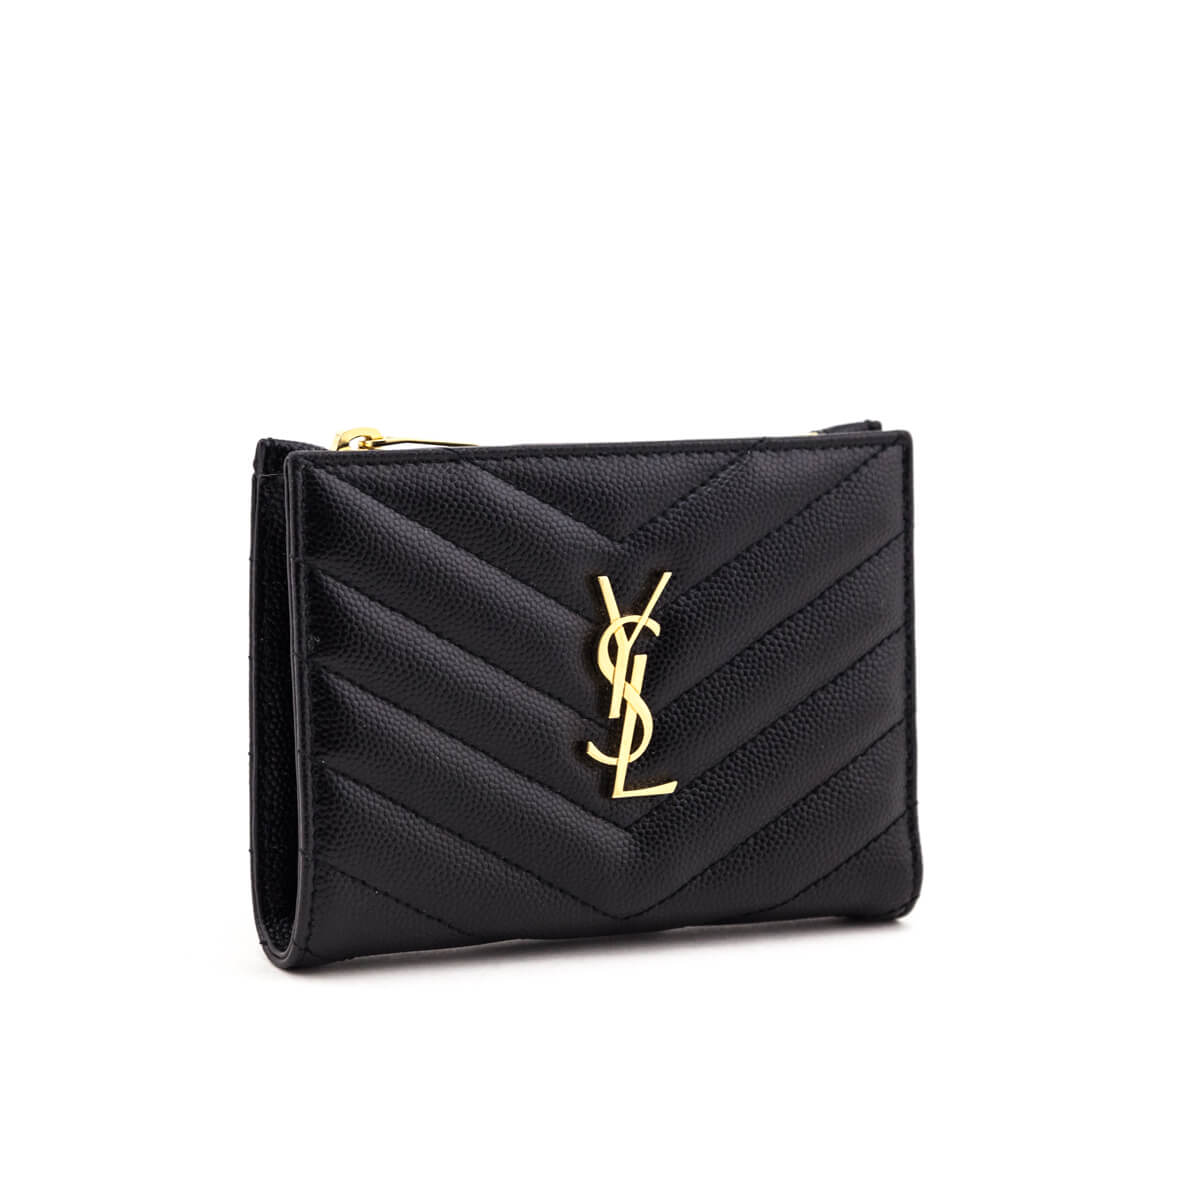 Collège Monogramme Handbags  Buy or Sell your Saint Laurent bags -  Vestiaire Collective